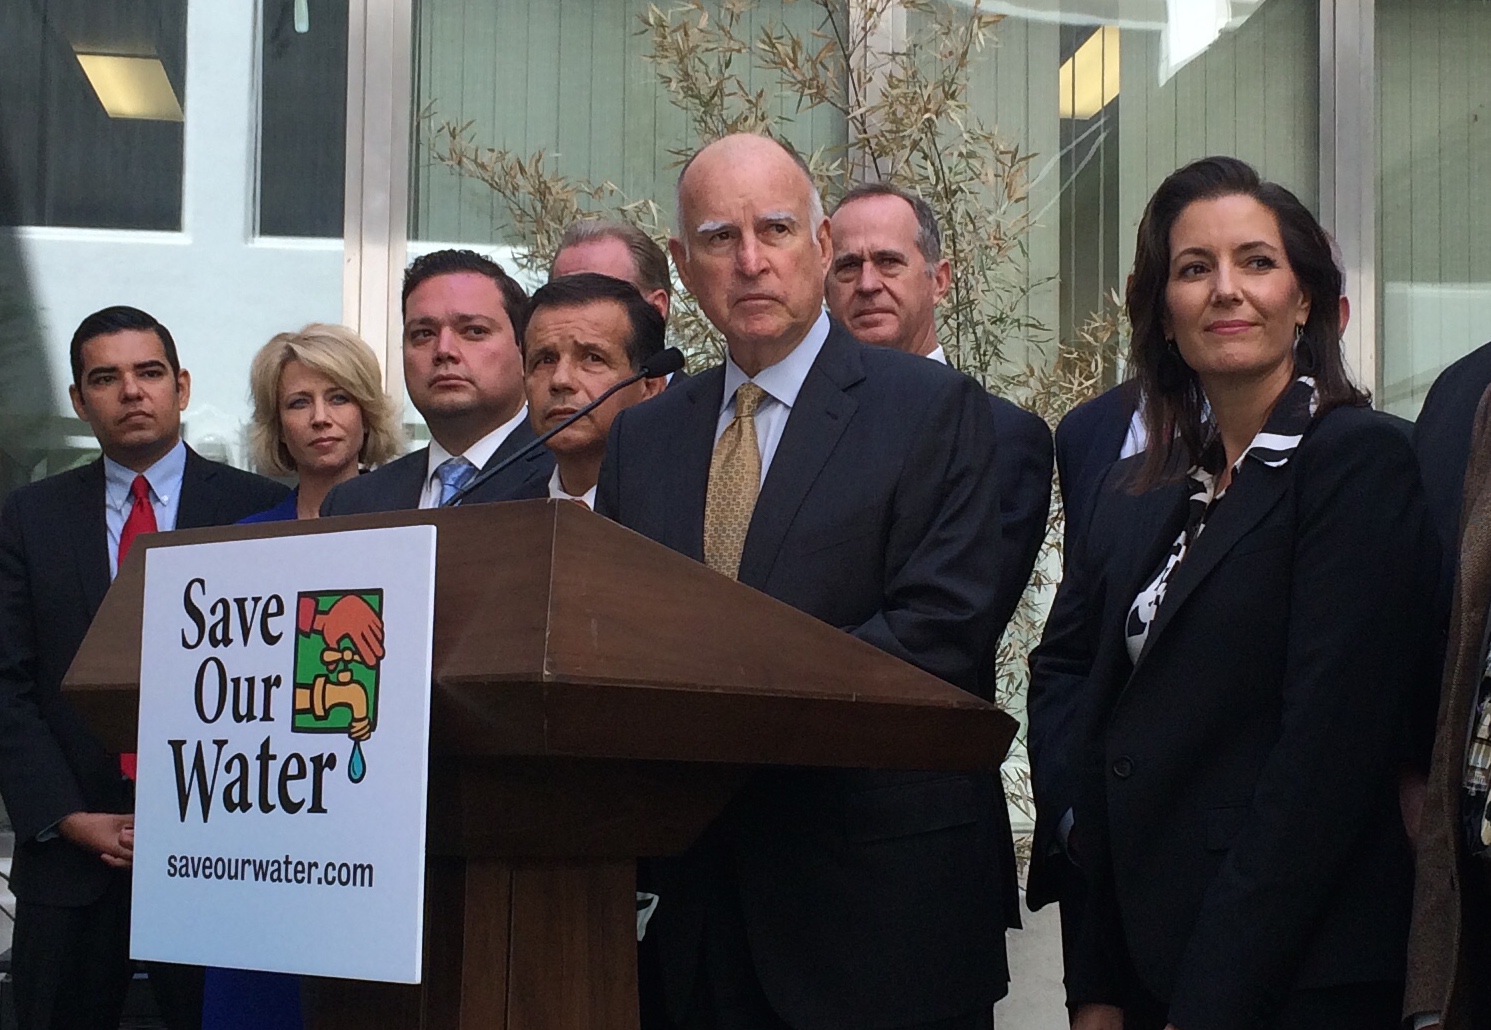 Gov. Jerry Brown holds a news conference at the state Capitol on Apr. 28, 2015 after meeting with California mayors about new efforts to help local drought relief programs. (John Myers/KQED)